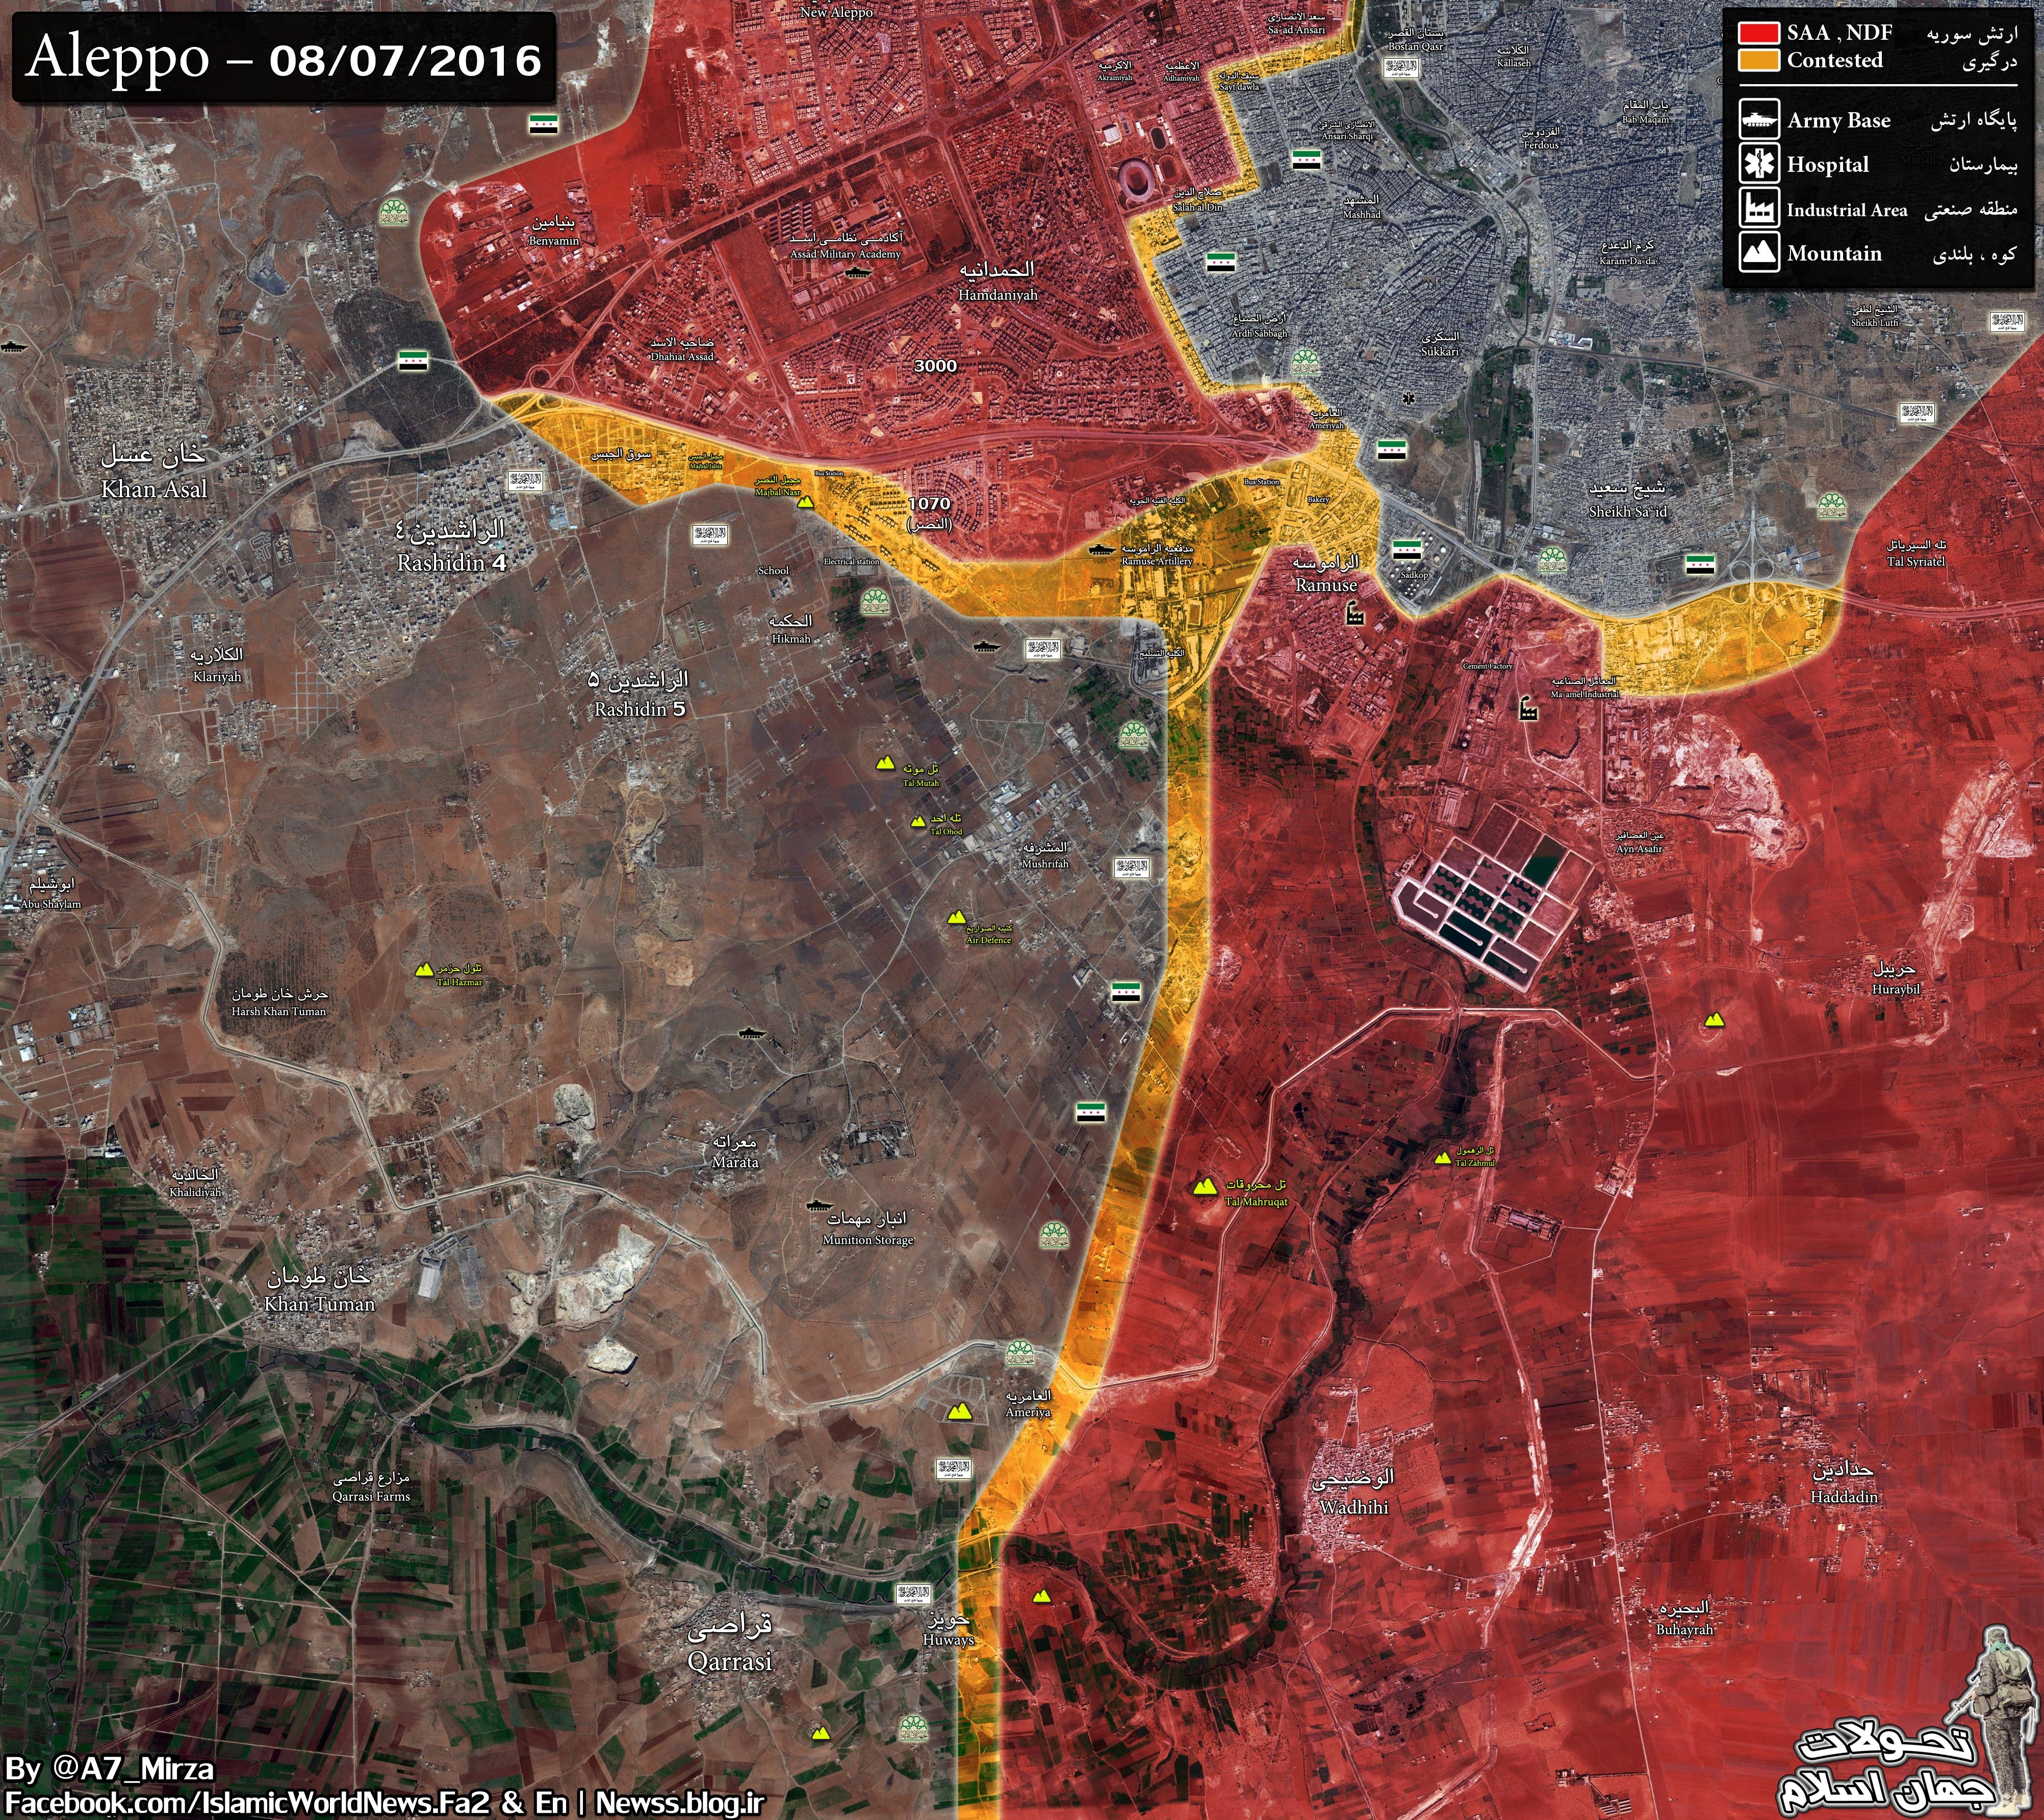 Overview of Military Situation in Aleppo City (Maps, Videos)